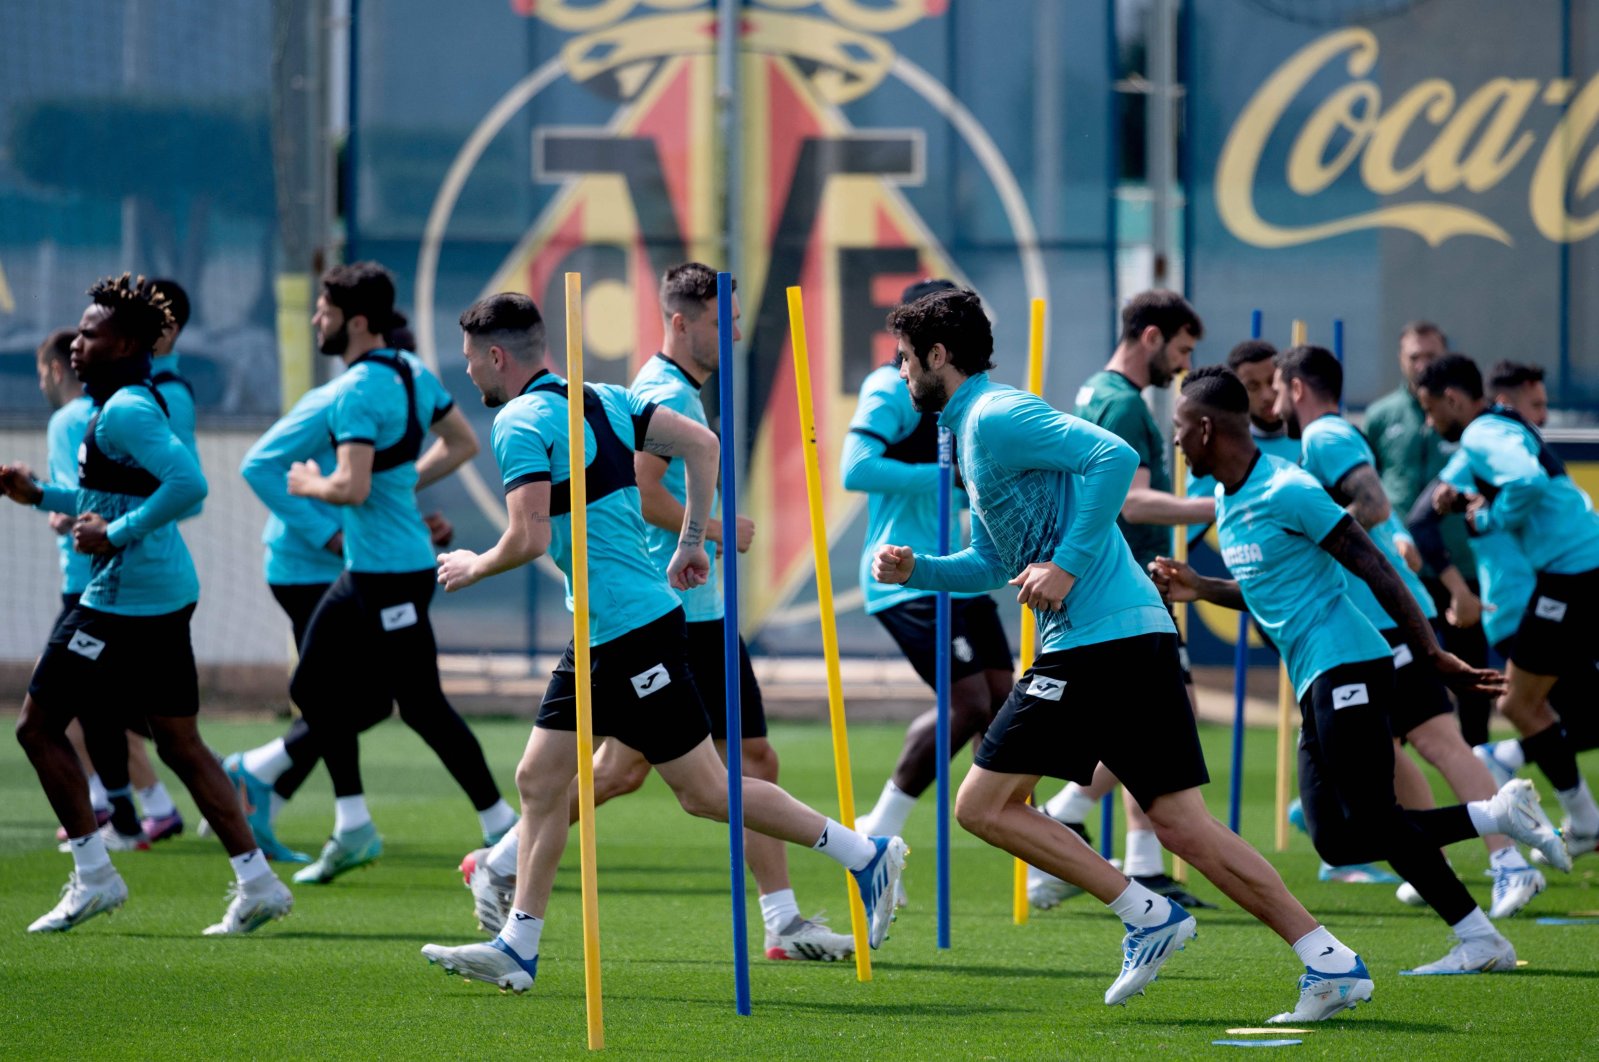 Villarreal players attend a training session ahead of their Champions League match against Liverpool, Vila-Real, Spain, April 26, 2022. (AFP Photo)